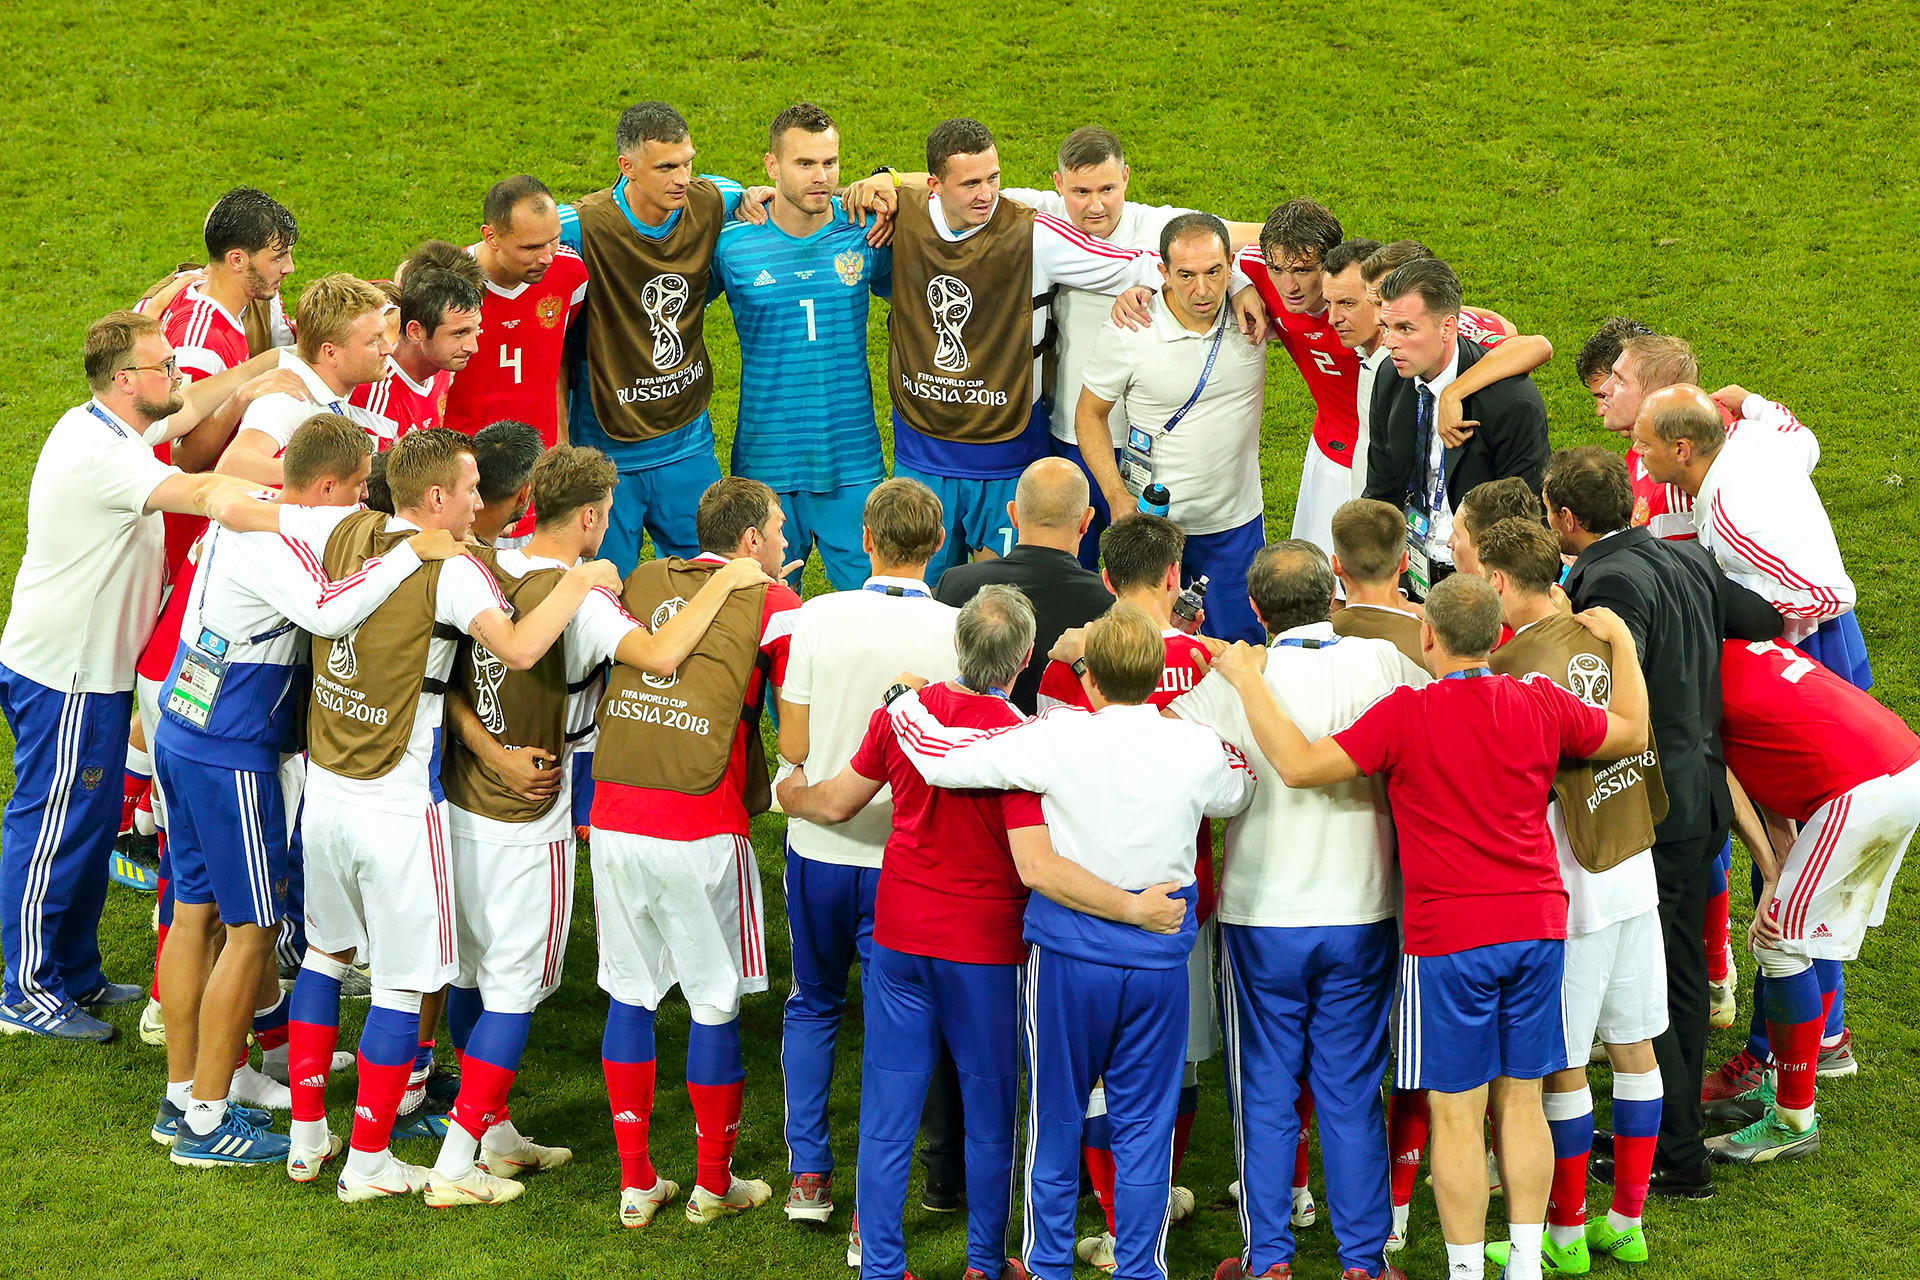 Team Russia before penalty series with Croatia. They lost but remain heroes for all Russian football fans.